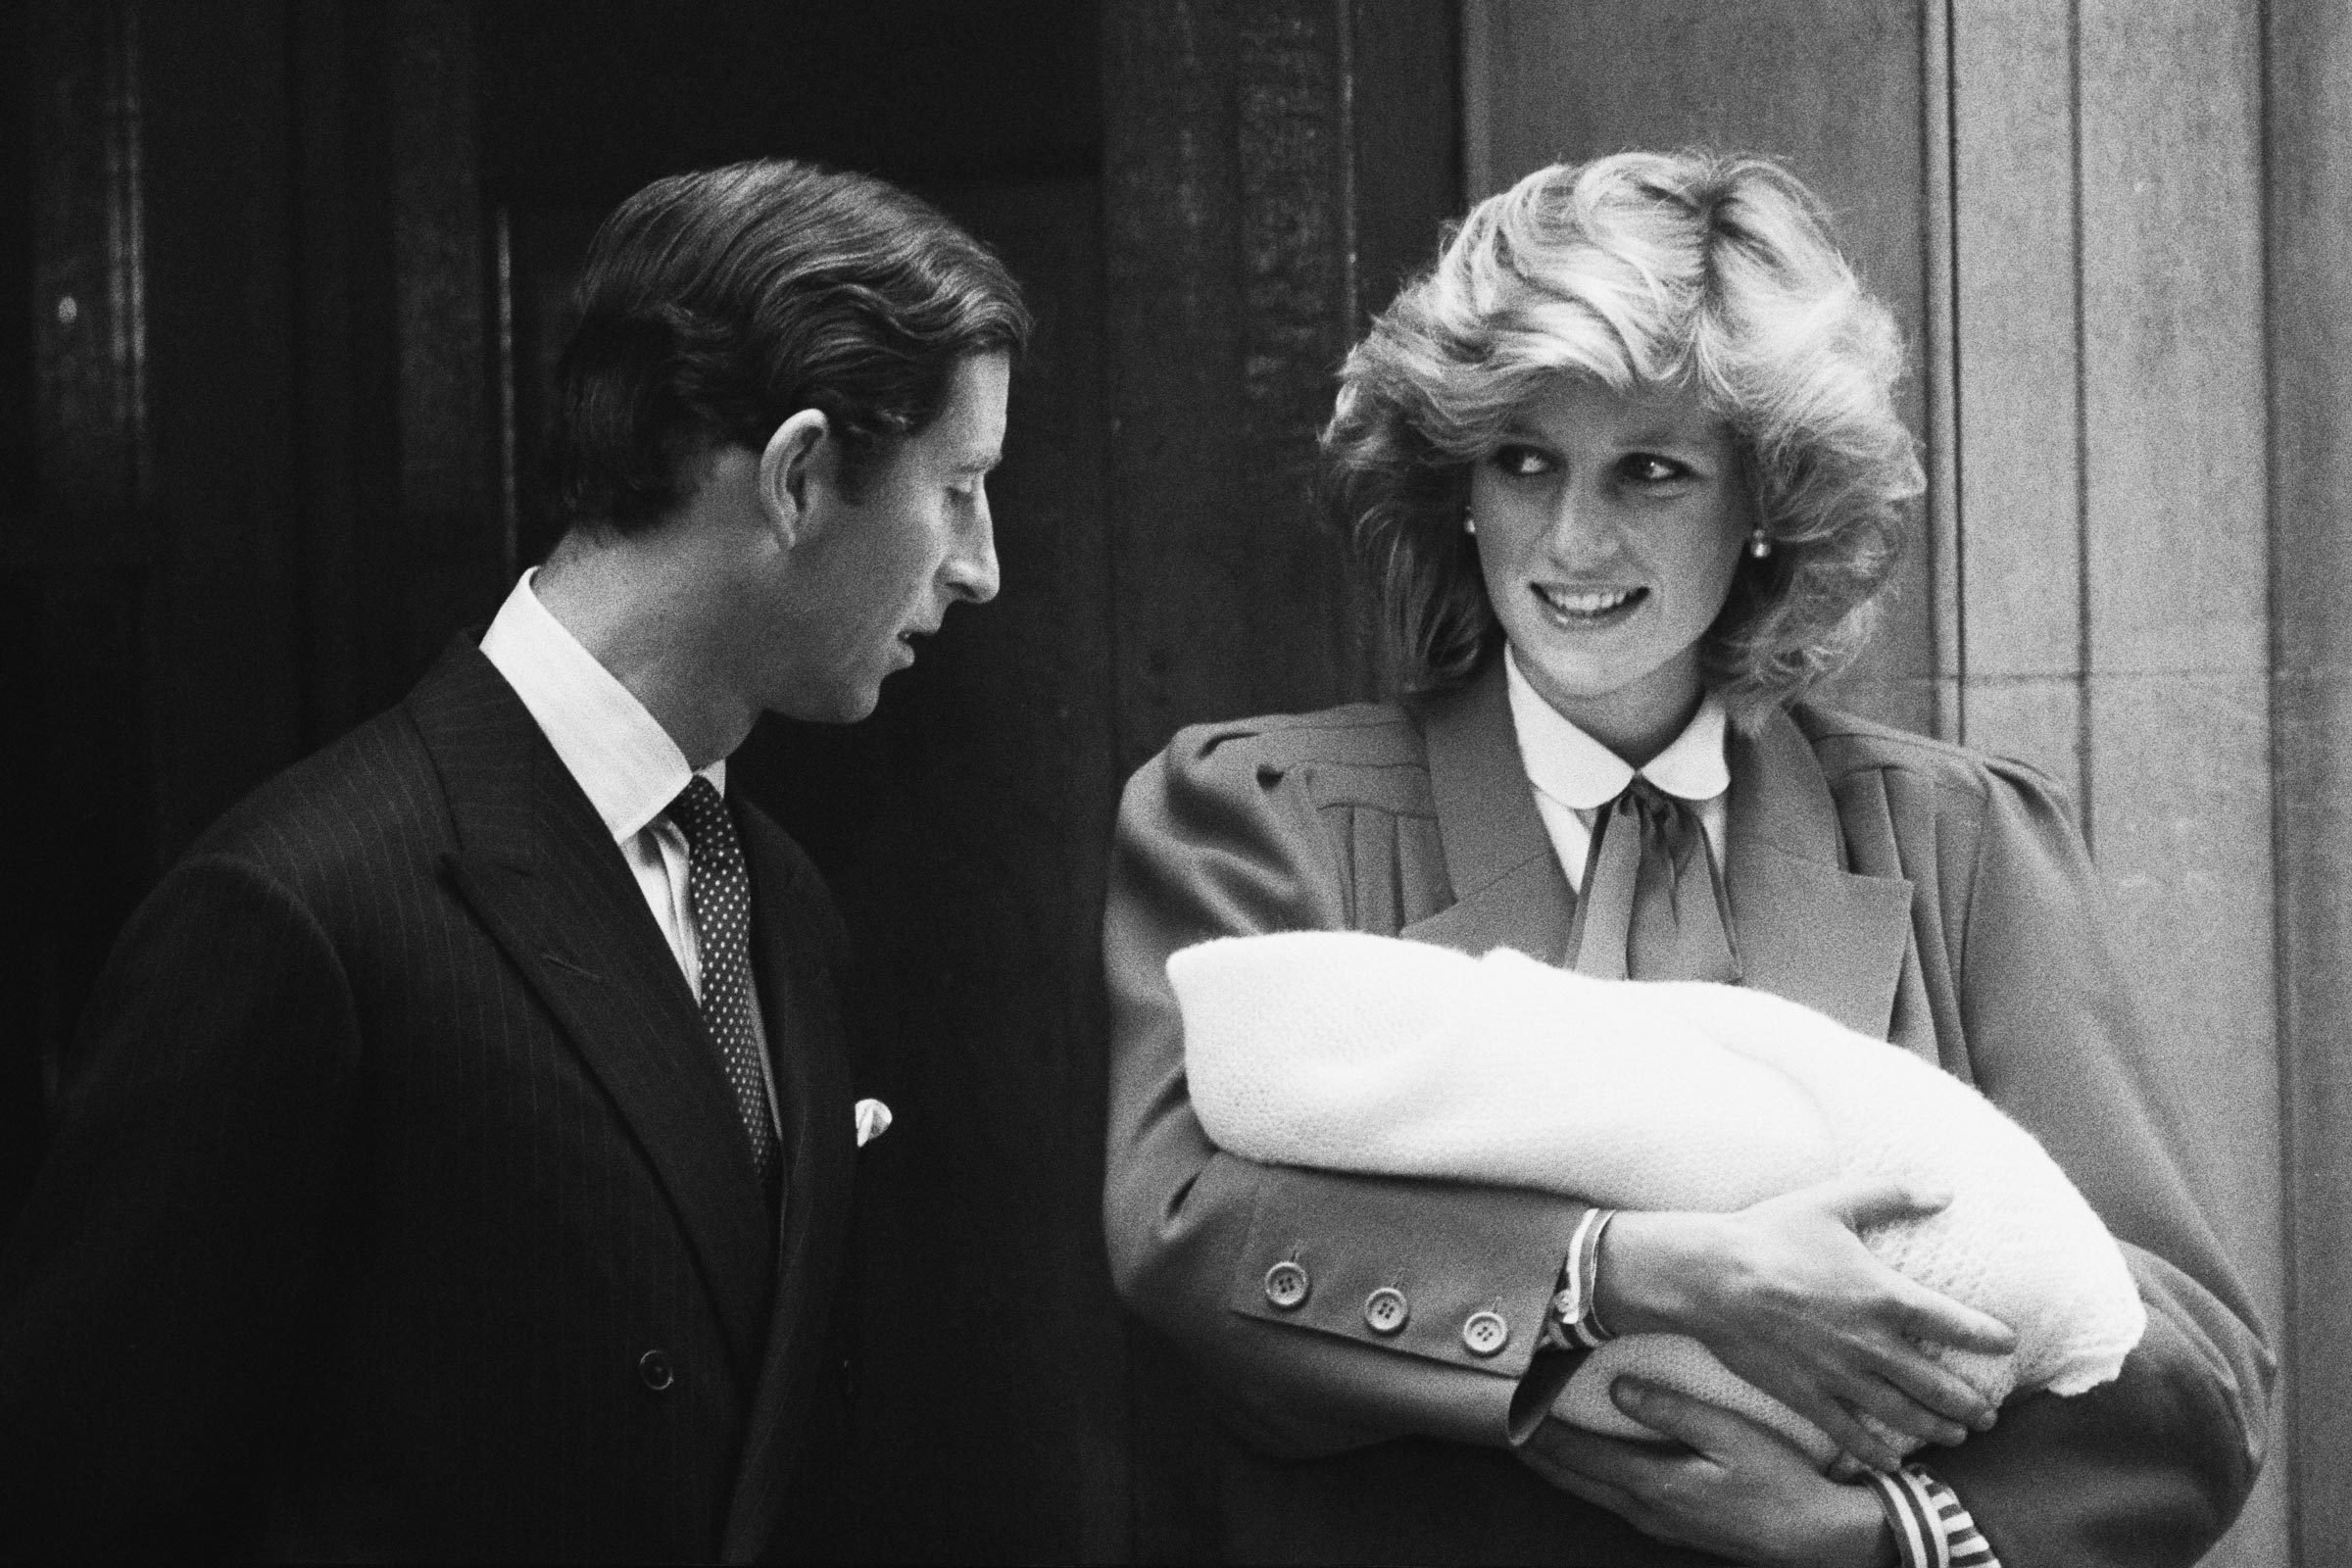 Charles, Prince of Wales and Diana, Princess of Wales (1961-1997) leave the Lindo Wing of St Mary's Hospital with their son Prince Harry, in Paddington, London, 16th September 1984